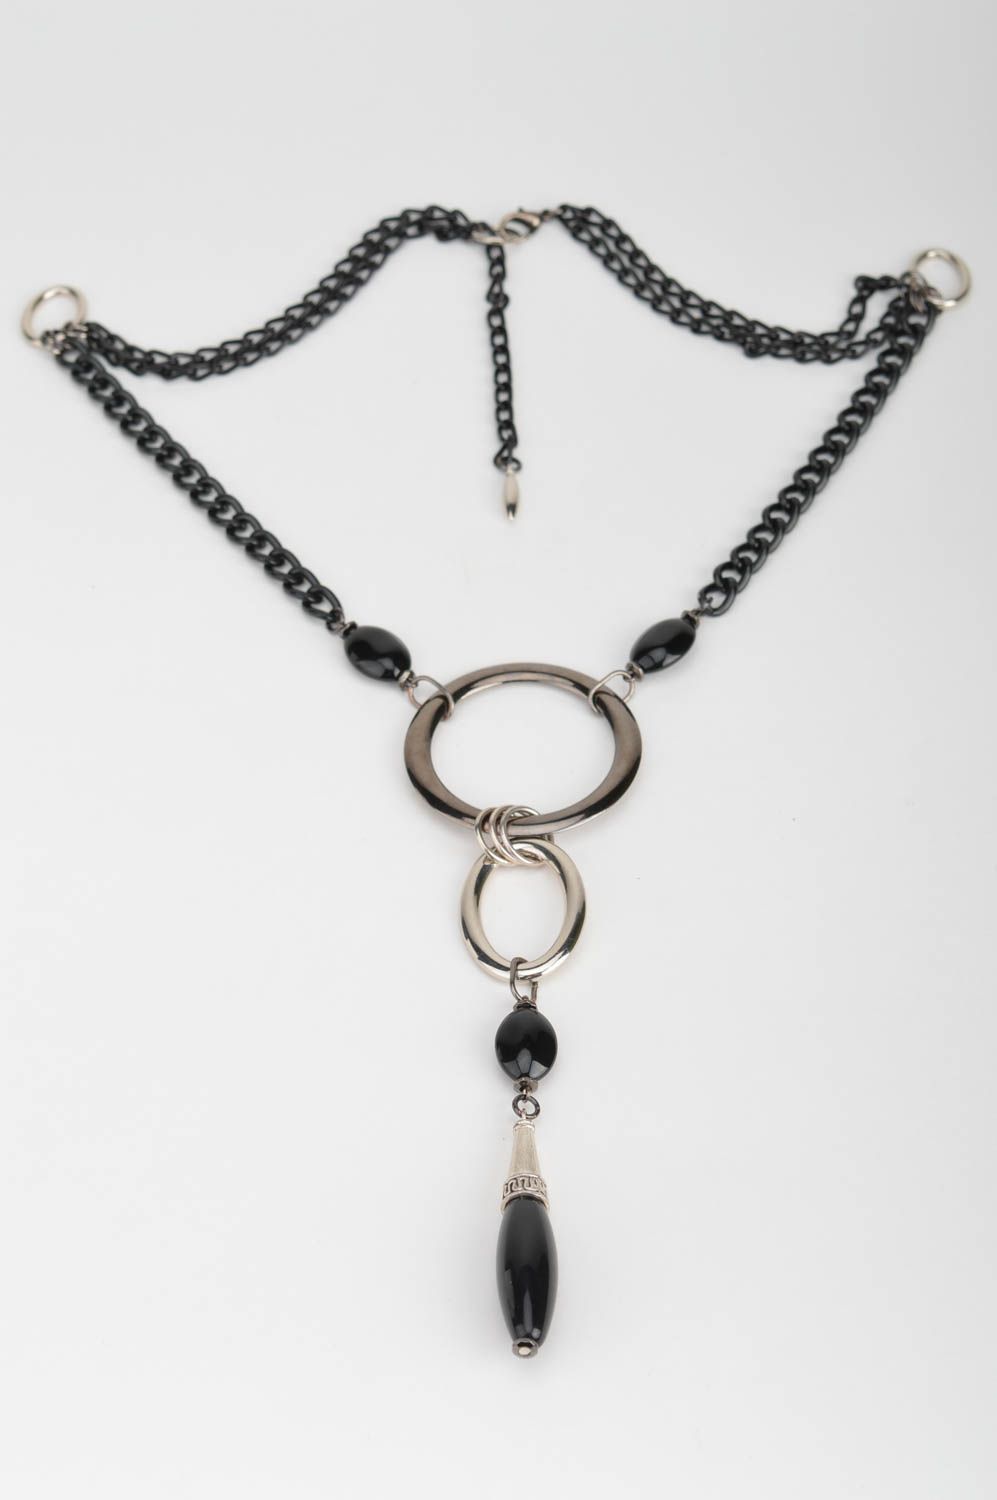 Unusual handmade black and silver colored metal necklace with beads and charm photo 2